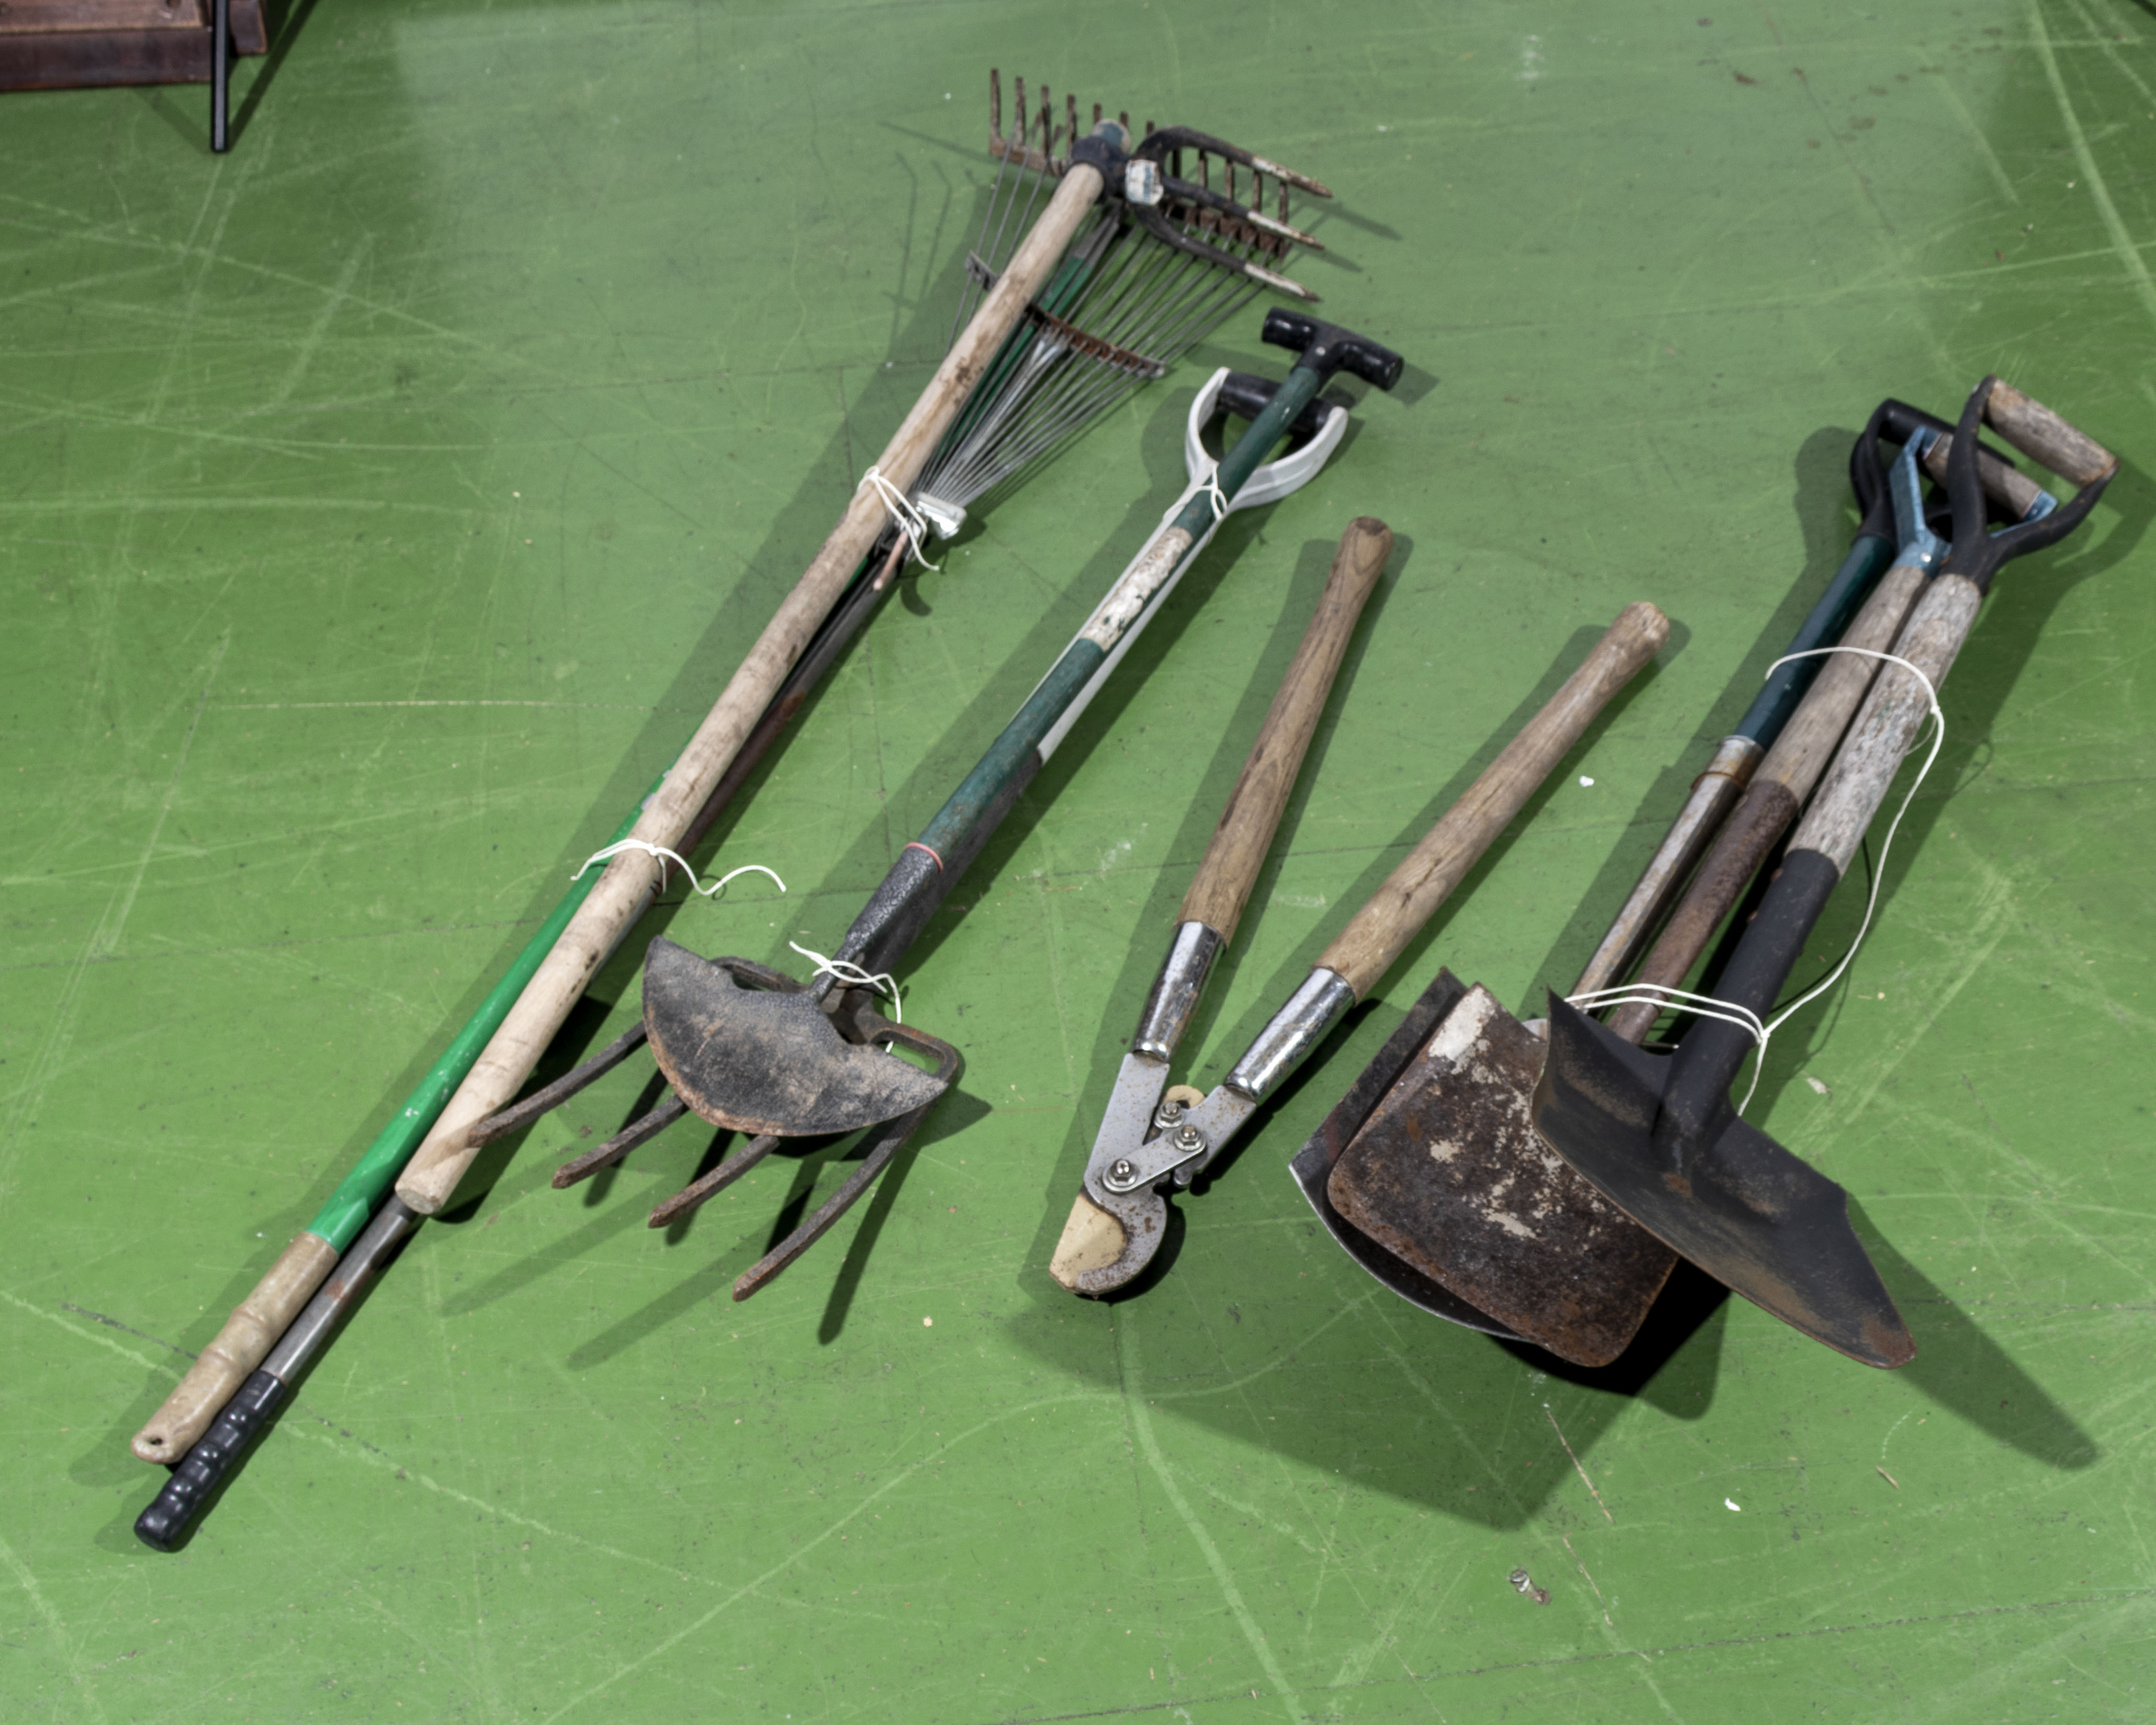 A bundle of garden tools, three spades, loppers, hoe, rakes and forks